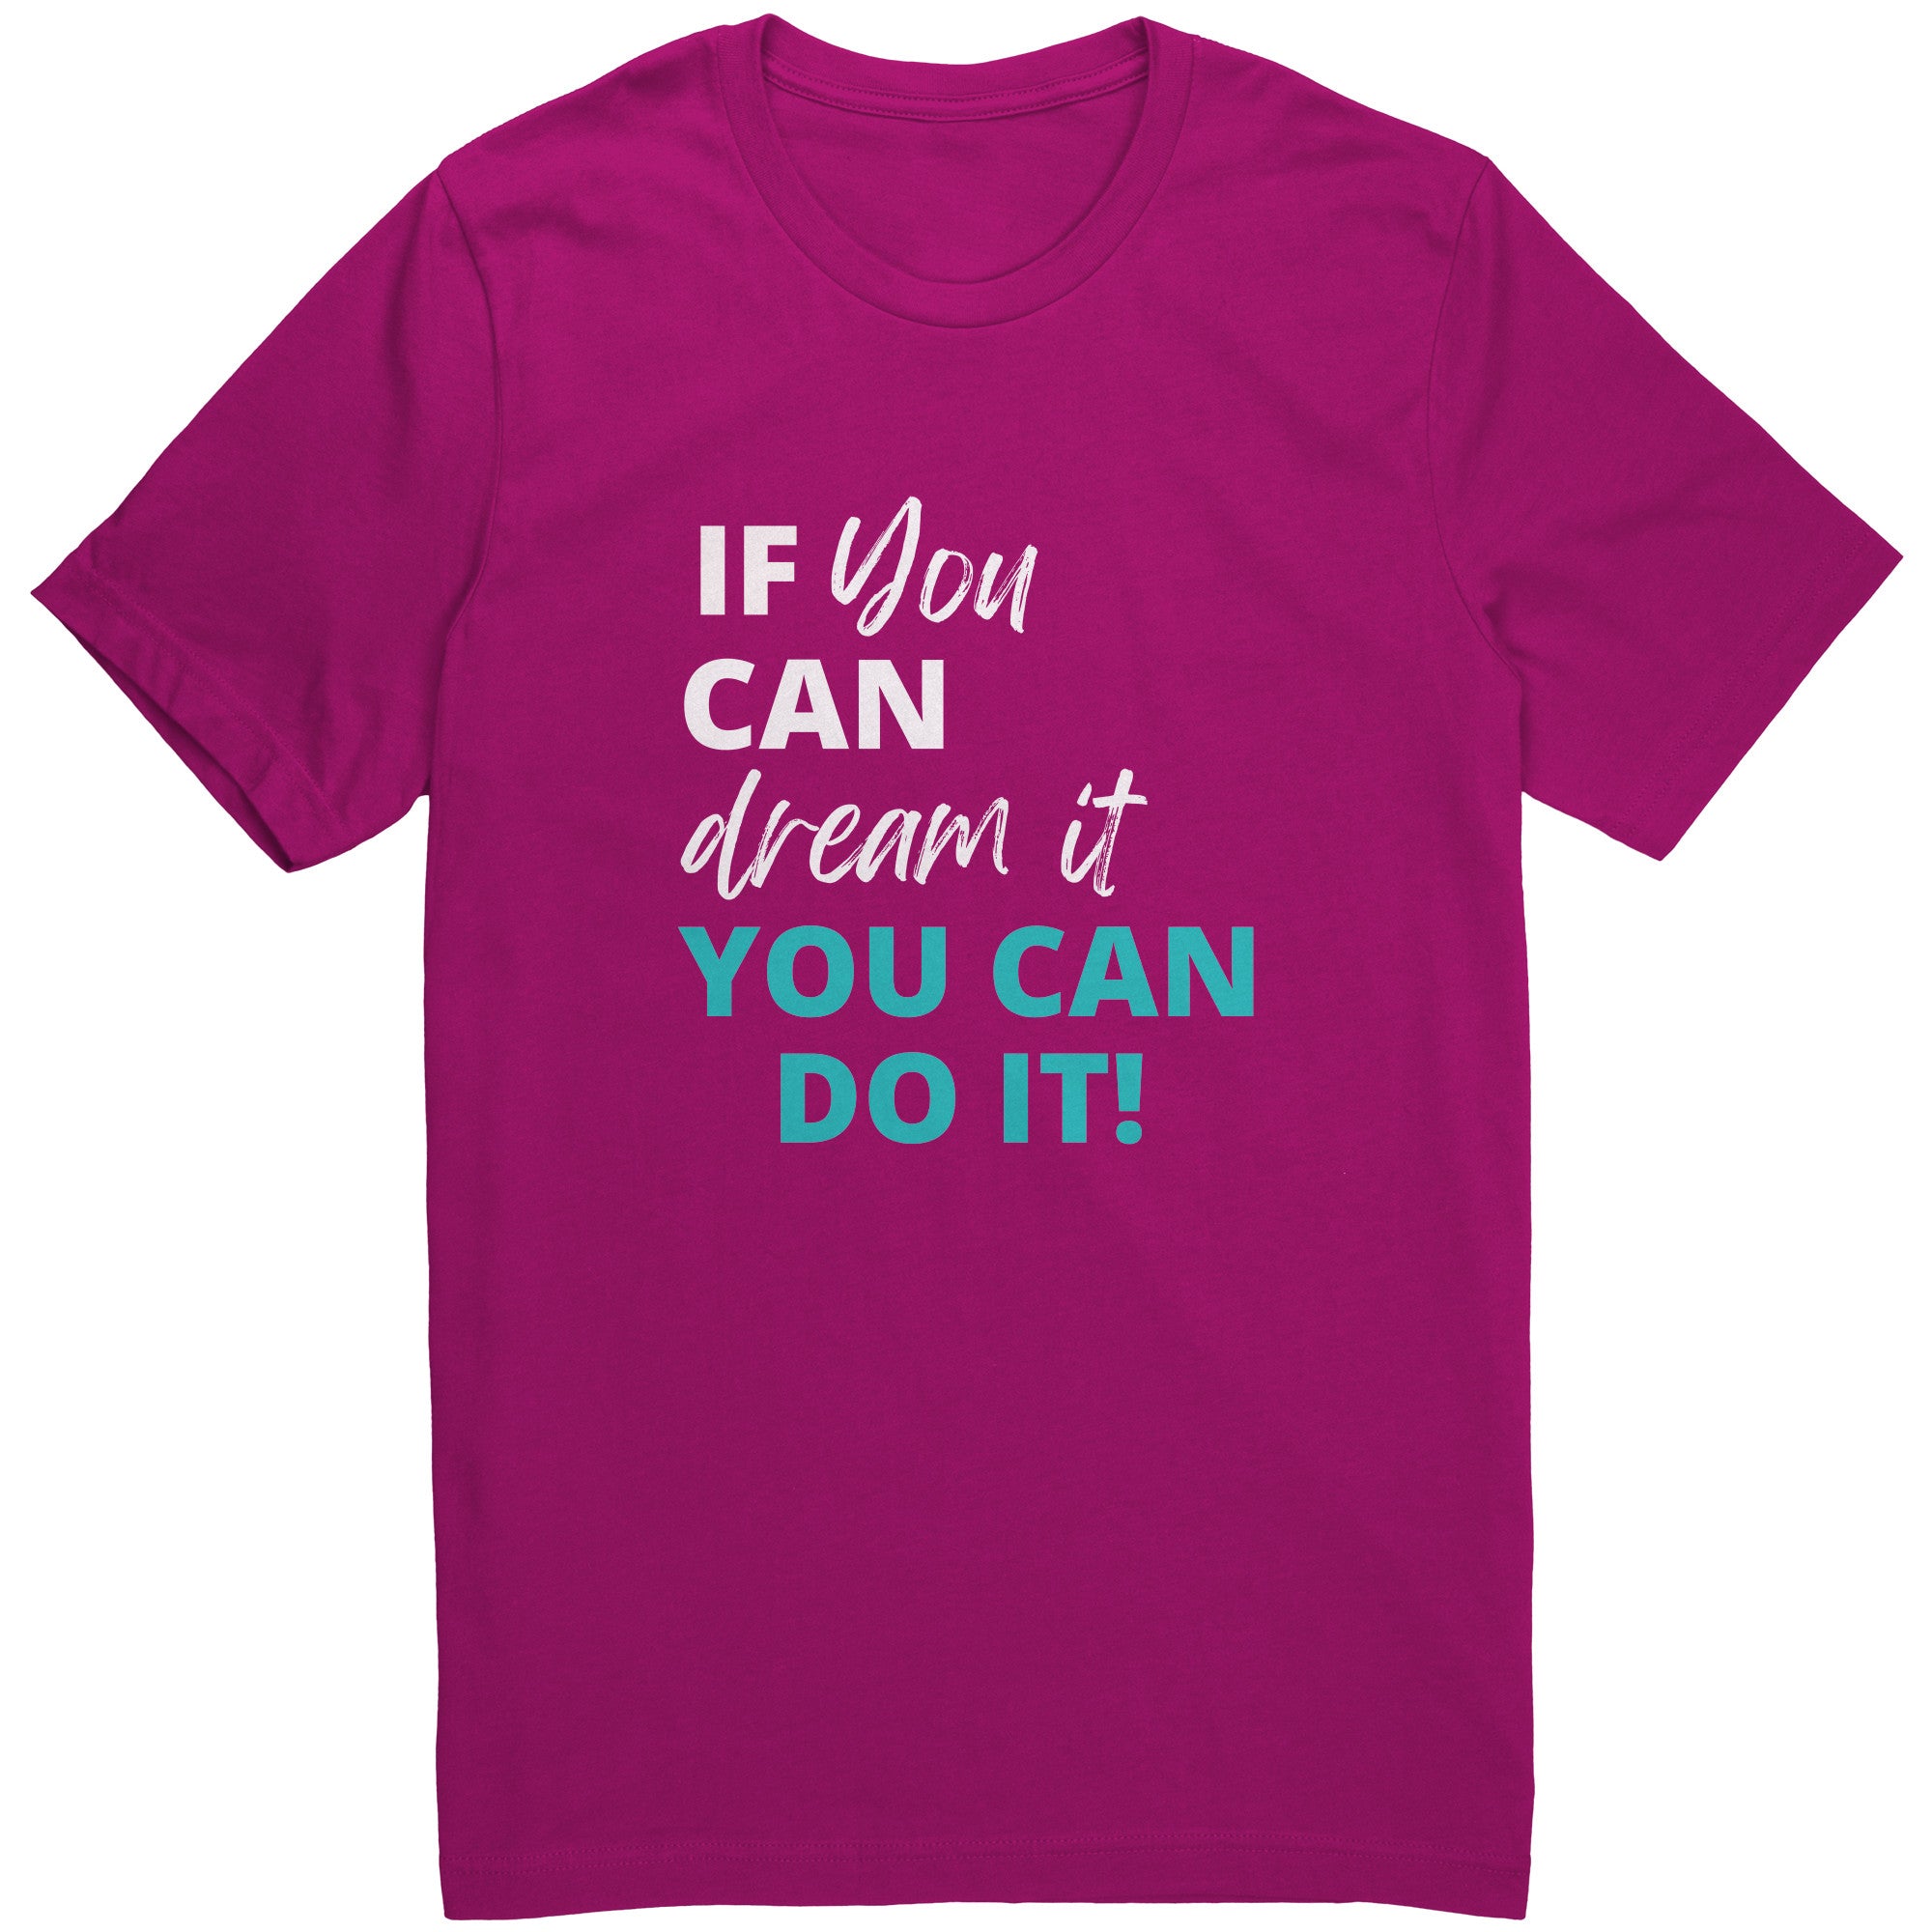 You Can Do IT!